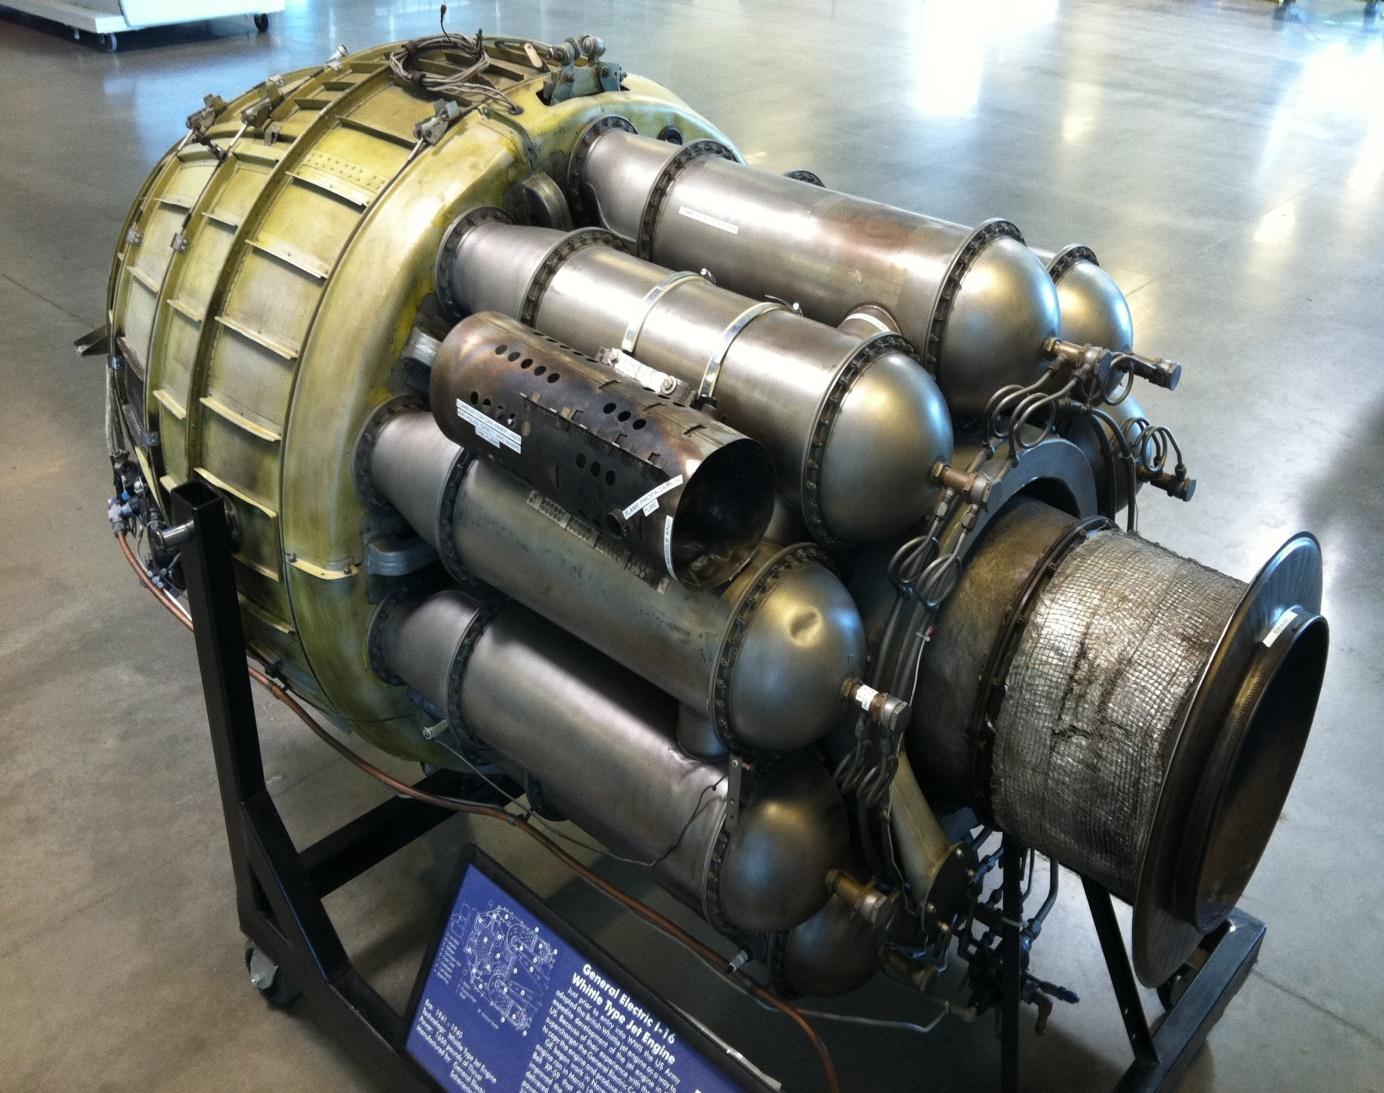 General Electric’s I-16: It copied heavily from Whittle’s J31.